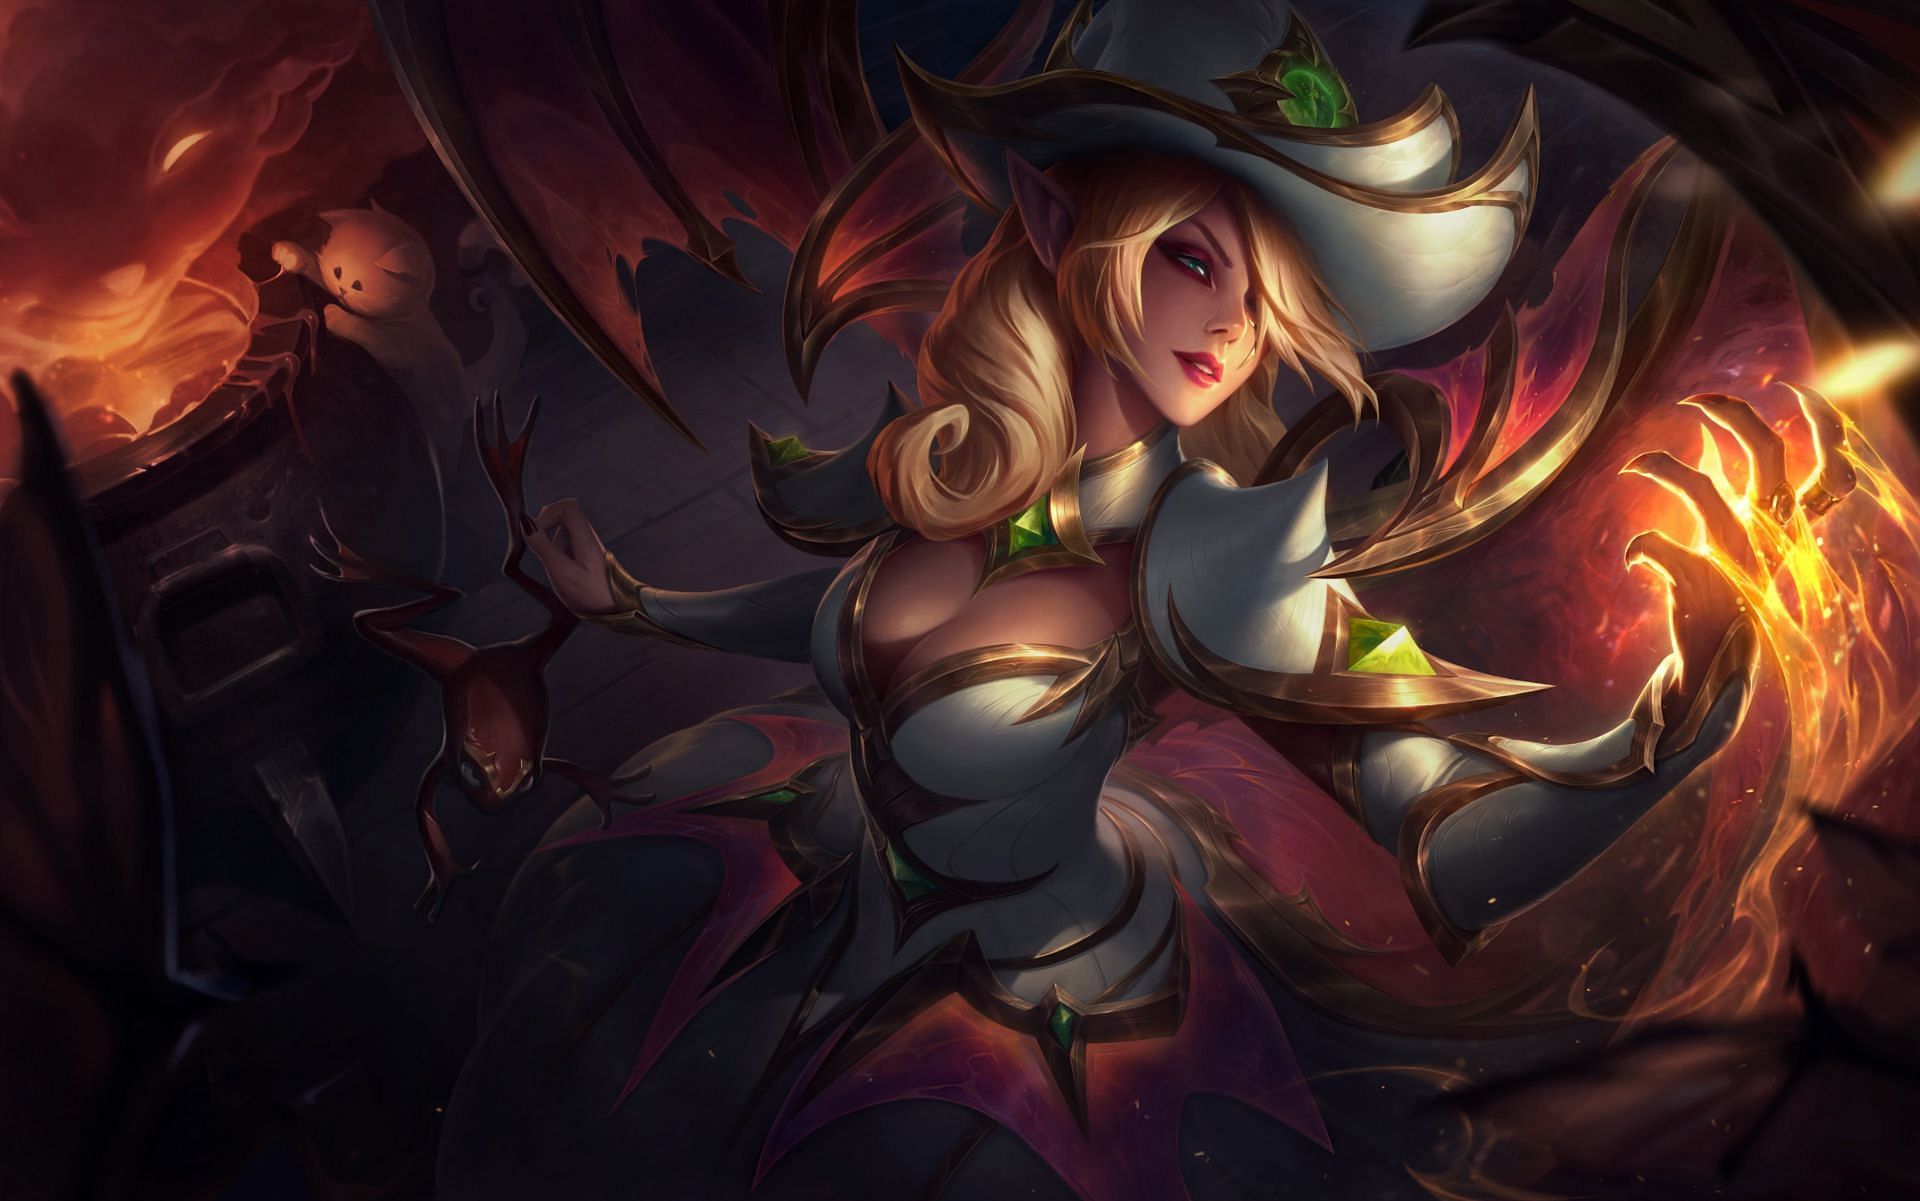 League of Legends leaks reveal brand new Bewitching skinline for